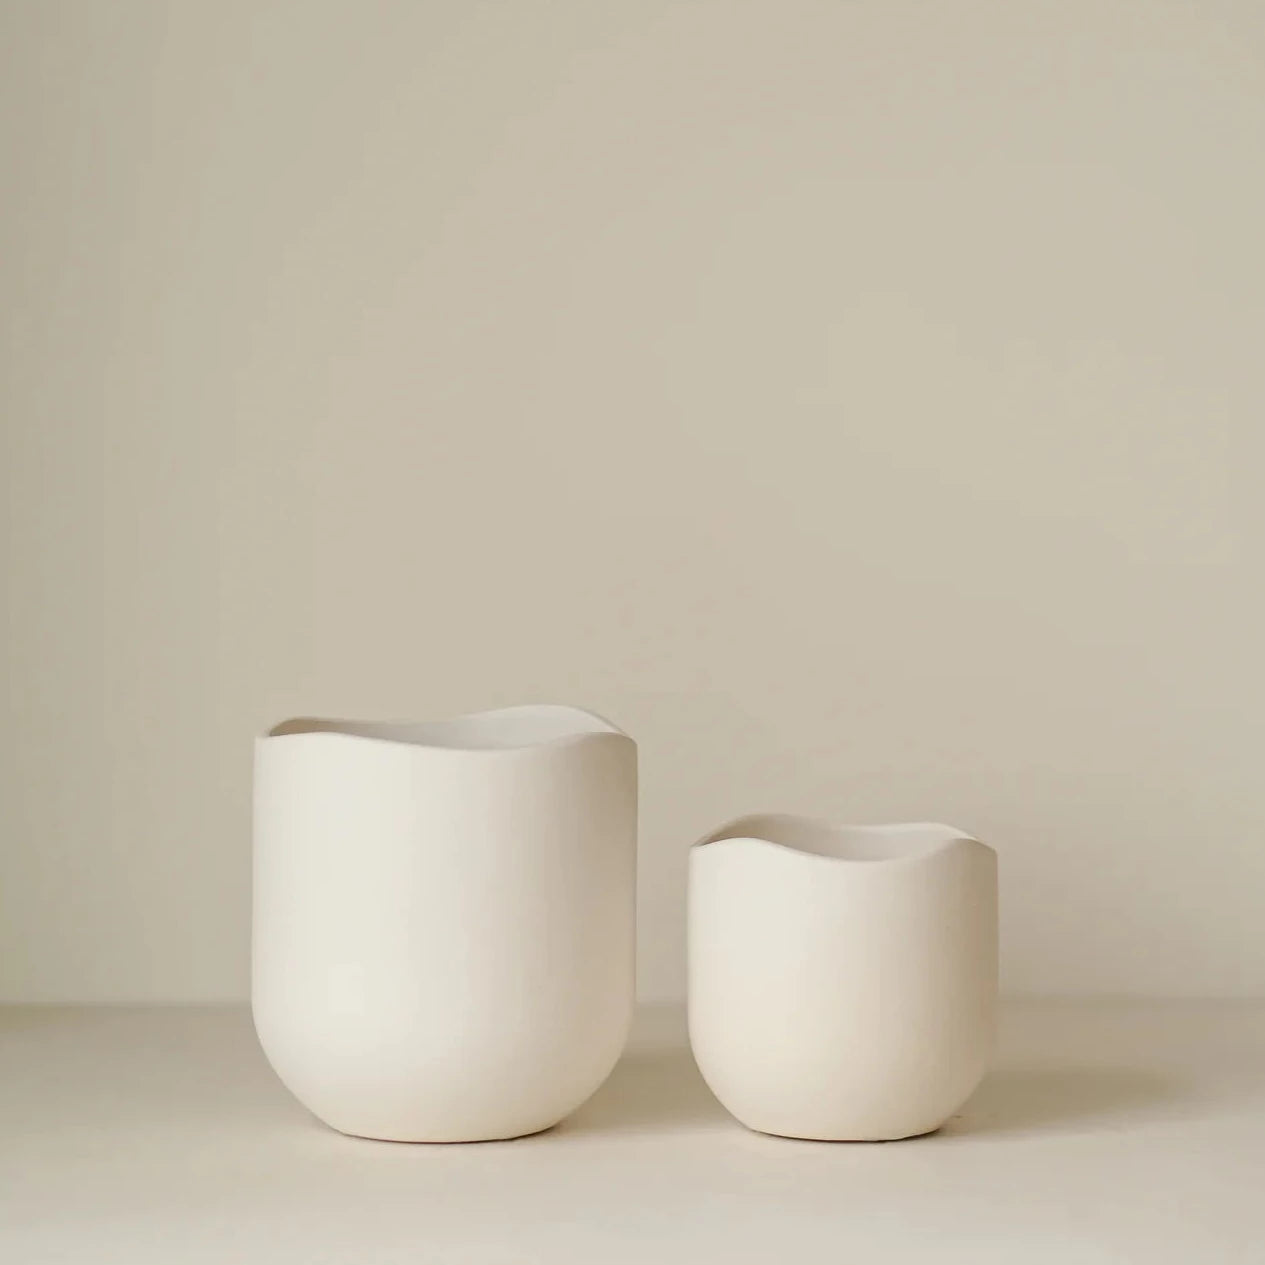 Small Wavy Edge Vase available at Rook & Rose.